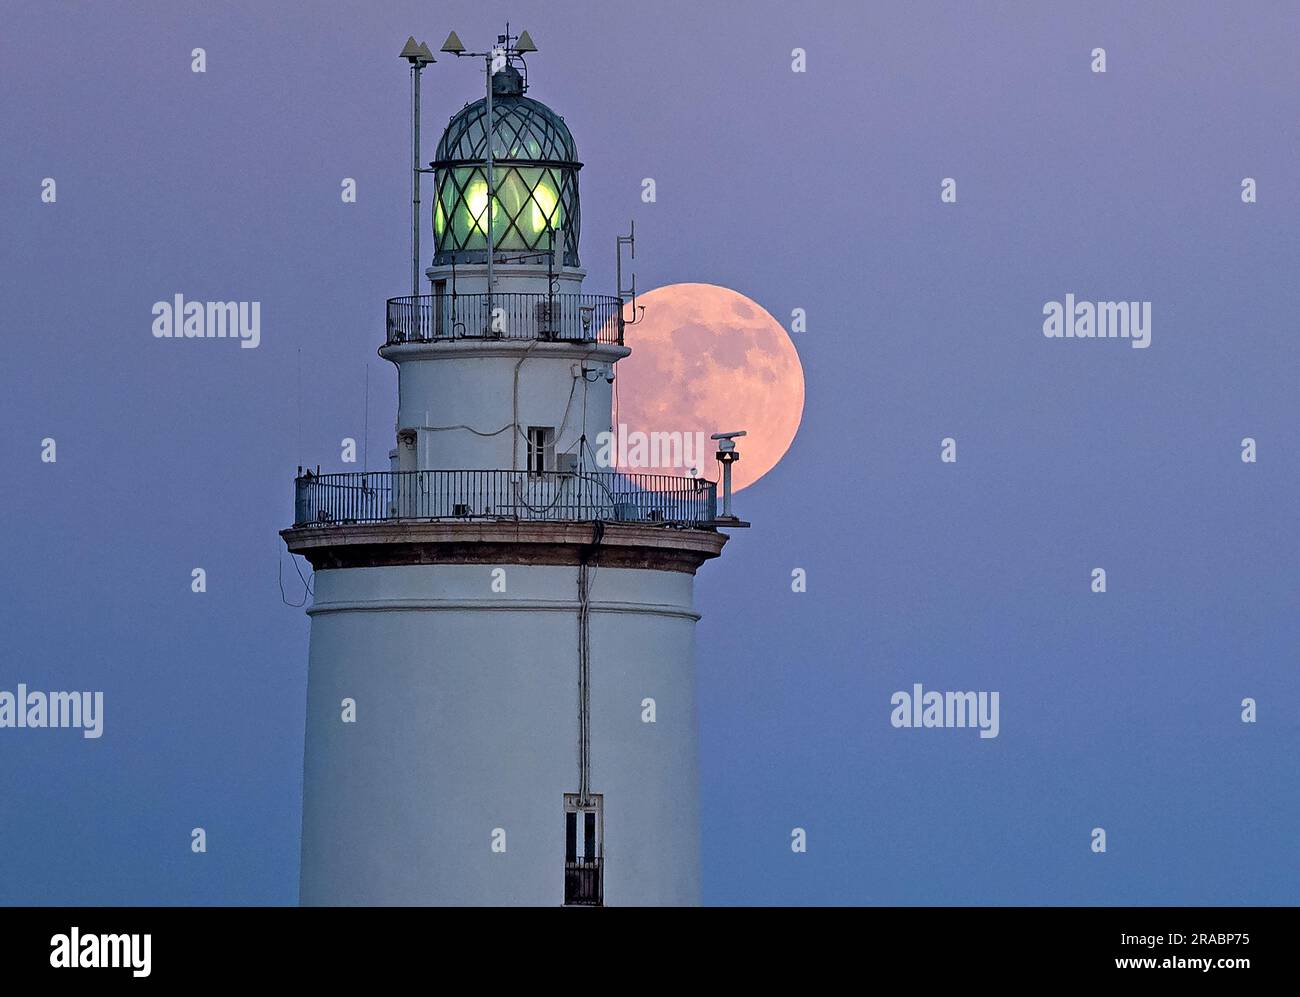 The buck moon rising in the sky over a lighthouse is seen at port of Malaga. At the beginning of July, the full deer moon takes place as one of the most striking astronomical events of the month. When the full moon takes place it appears larger and brighter than normal. Stock Photo